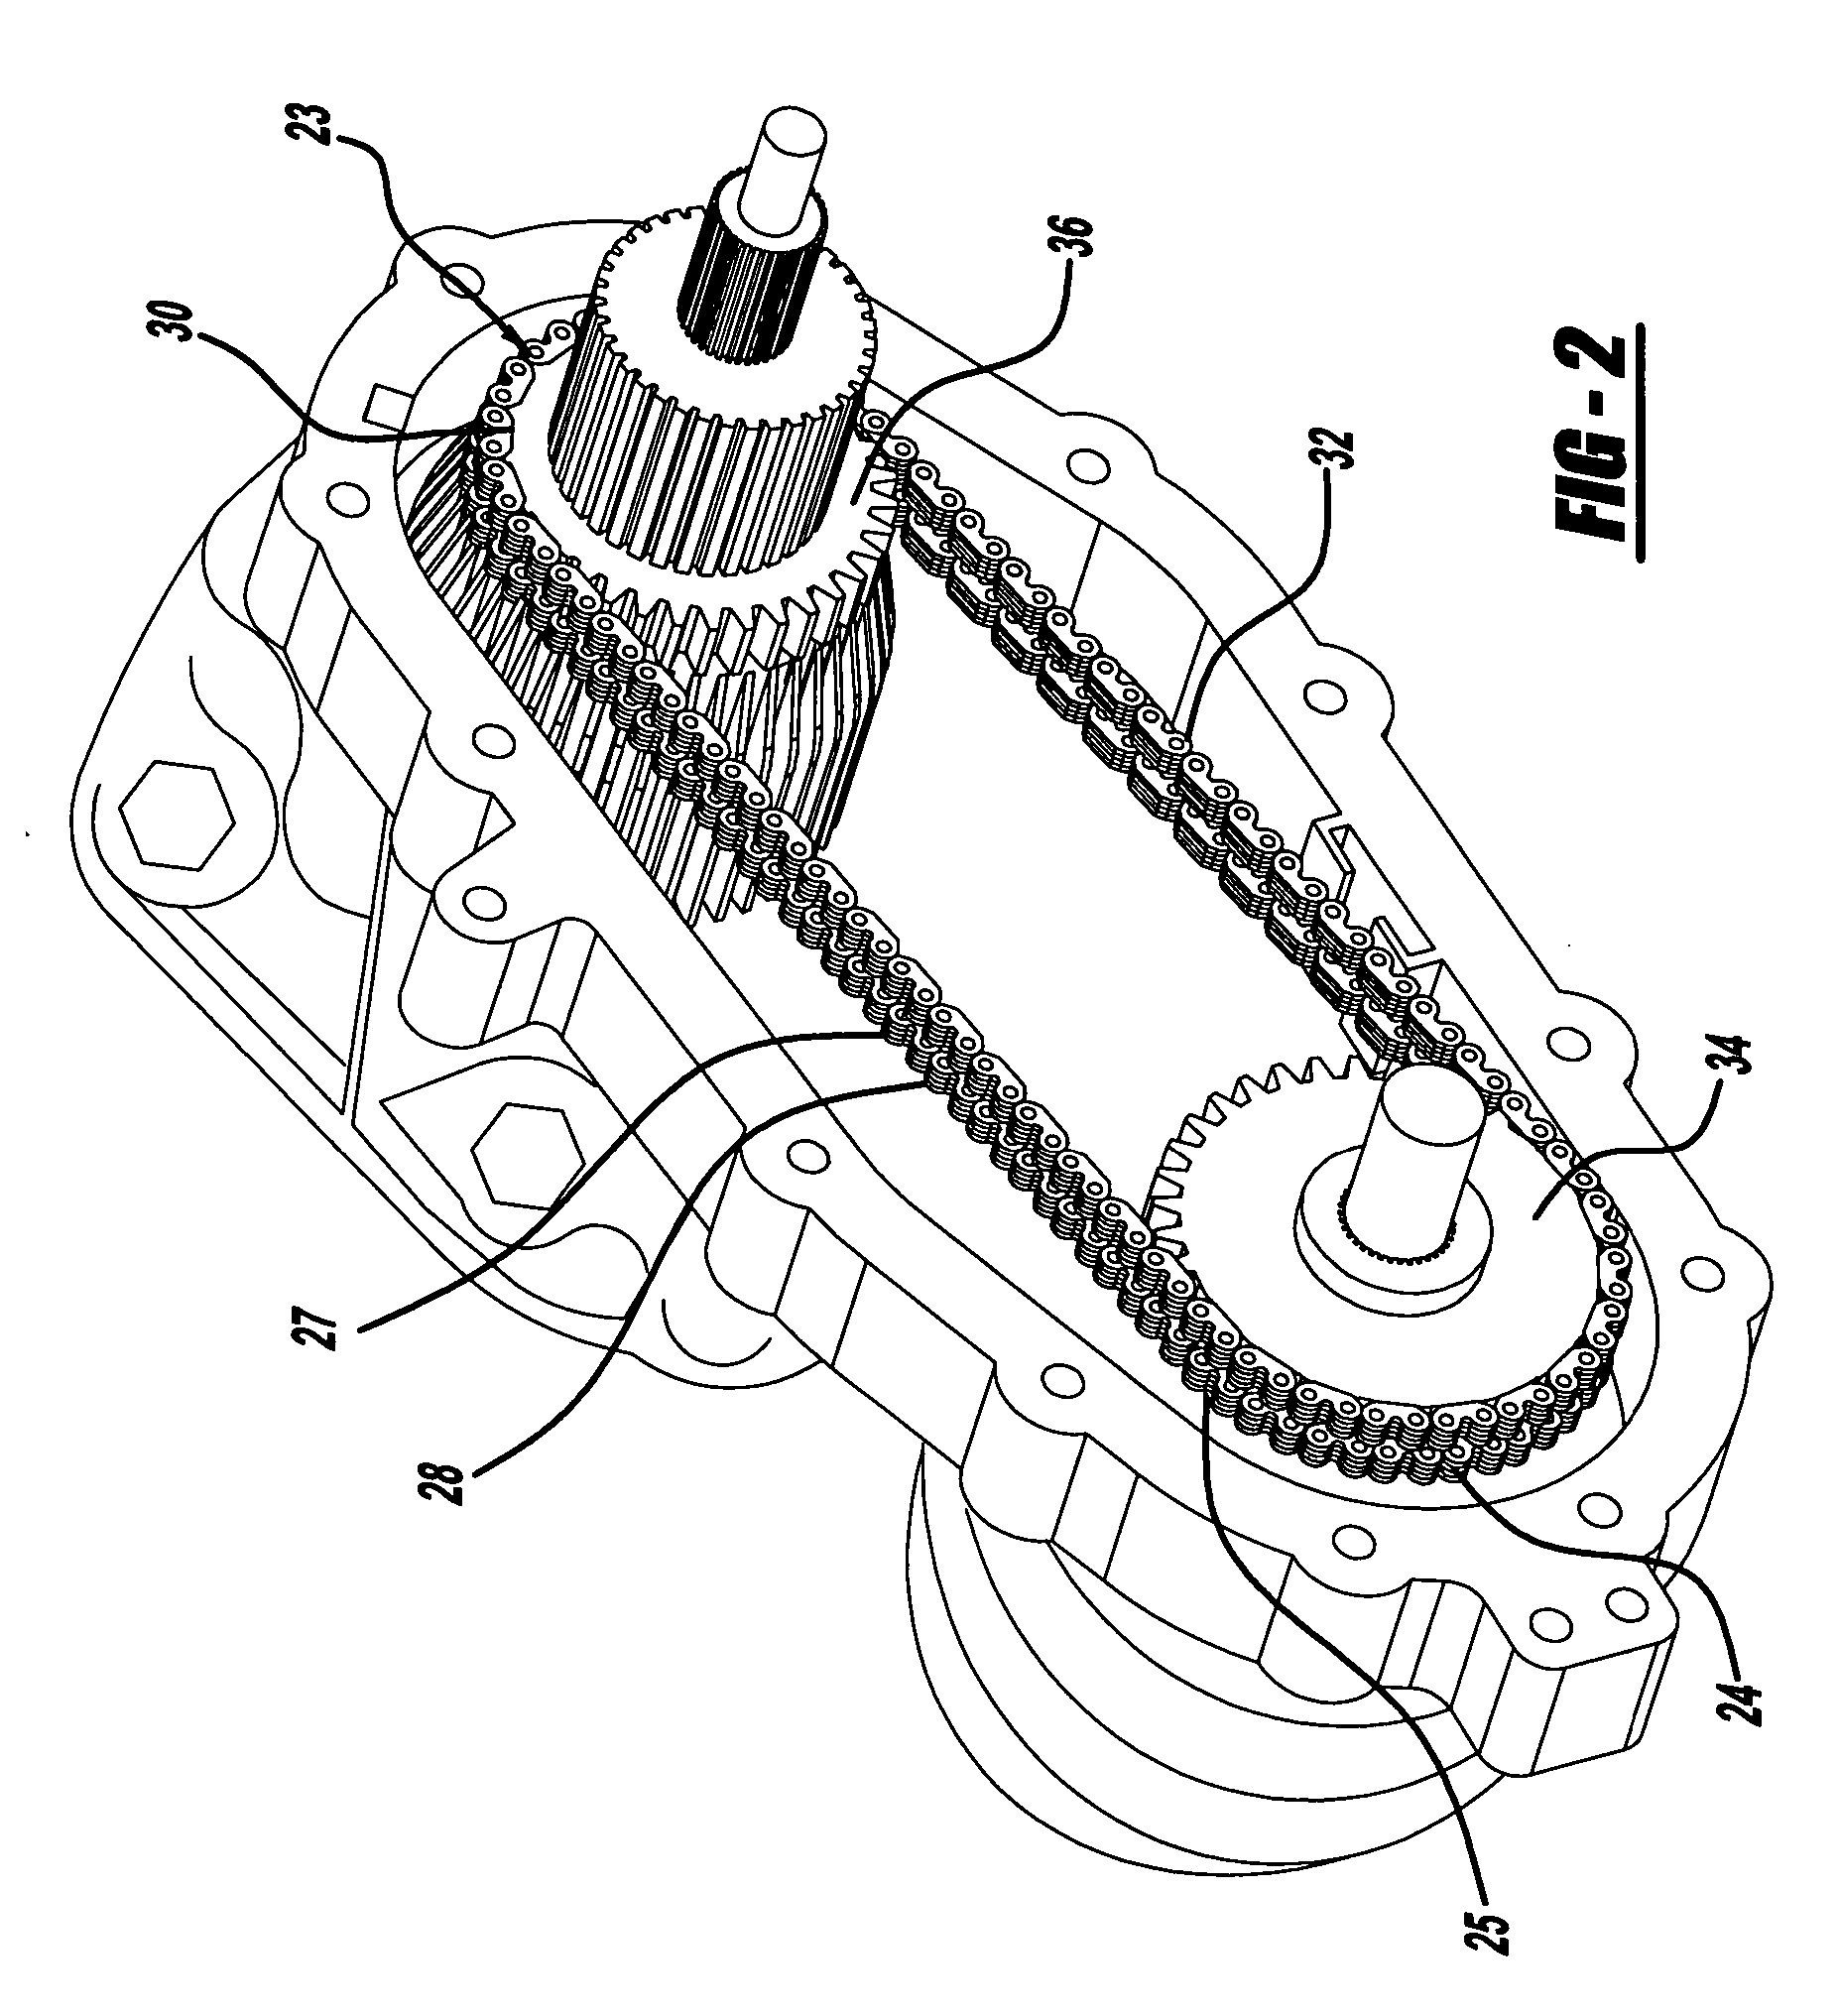 Phasing of chains, sprockets, and gears to provide enhanced noise vibration and harshness reduction